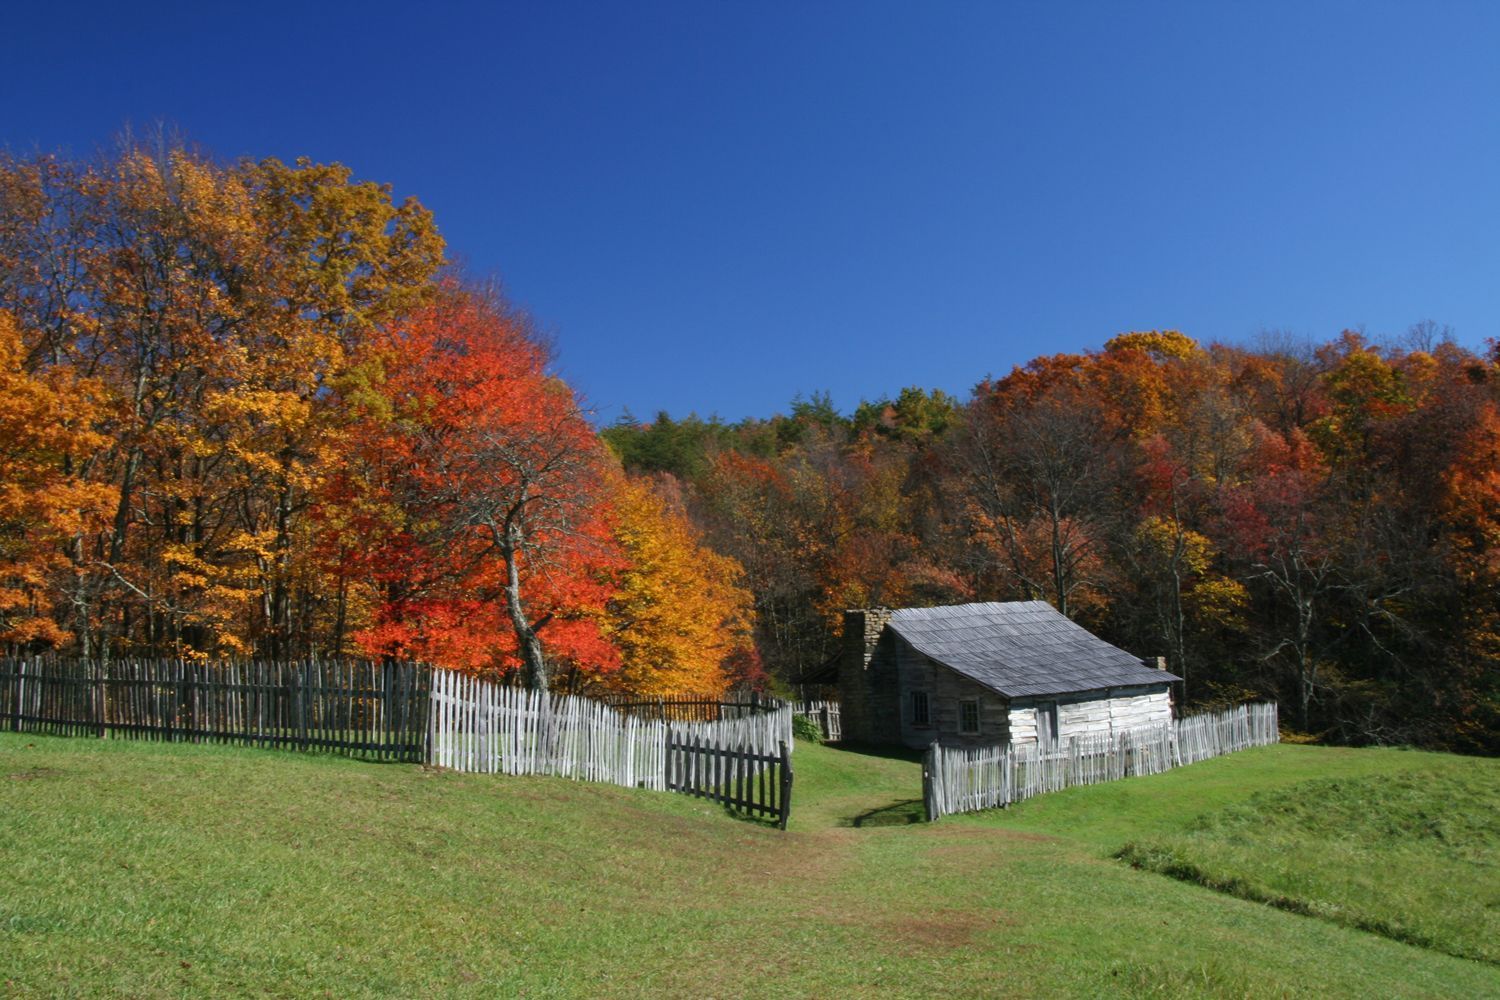 Weathered log cabins greet visitors to Hensley Settlement